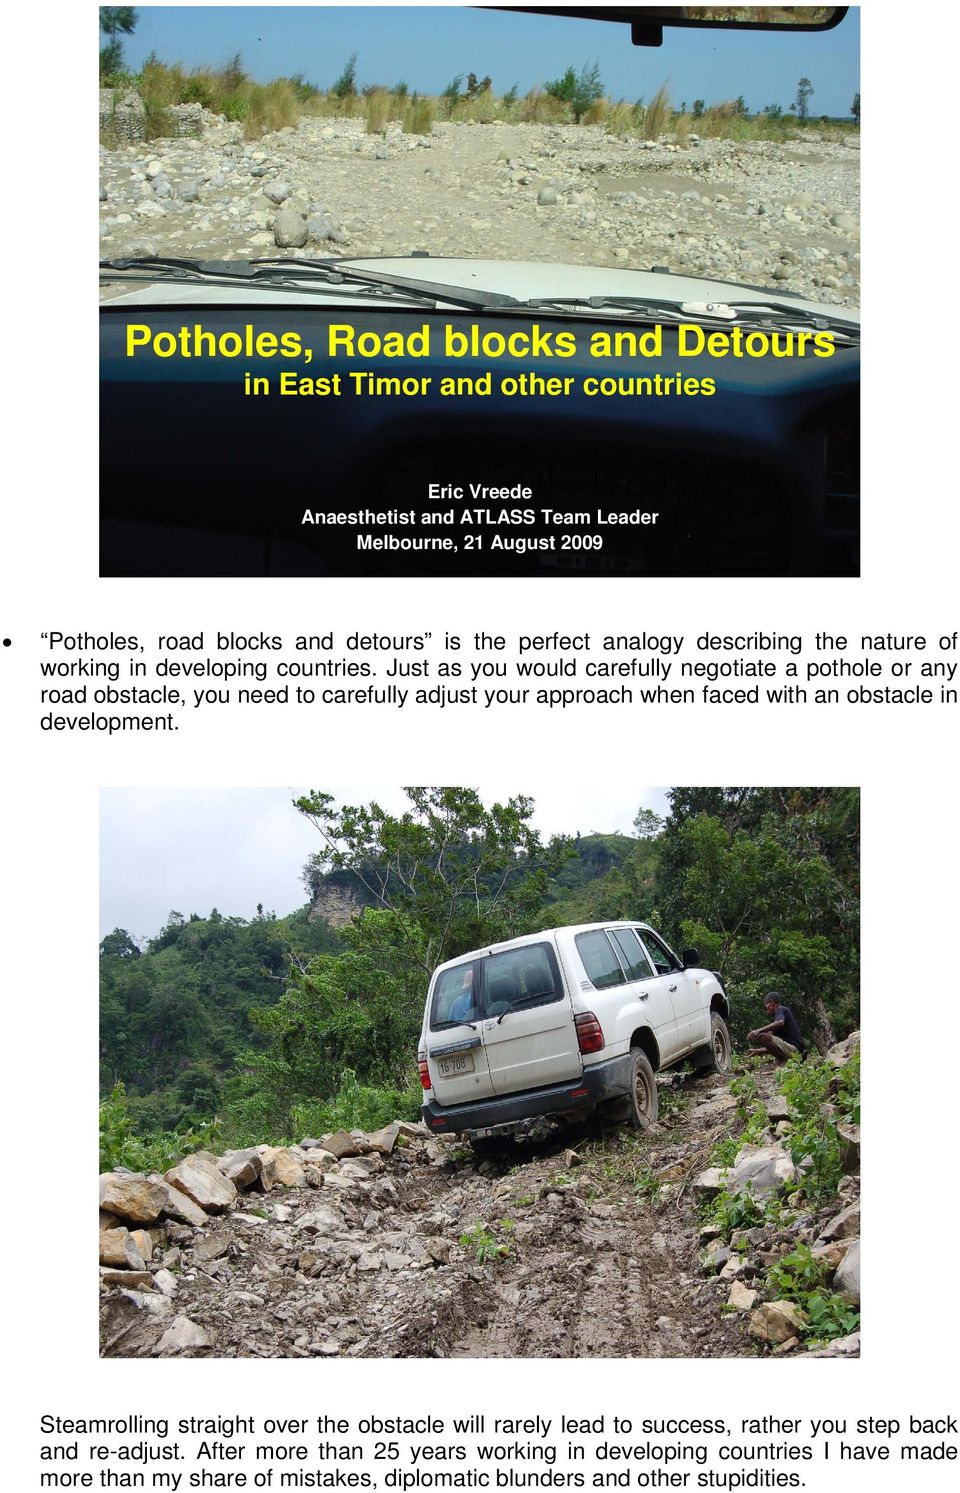 Just as you would carefully negotiate a pothole or any road obstacle, you need to carefully adjust your approach when faced with an obstacle in development.